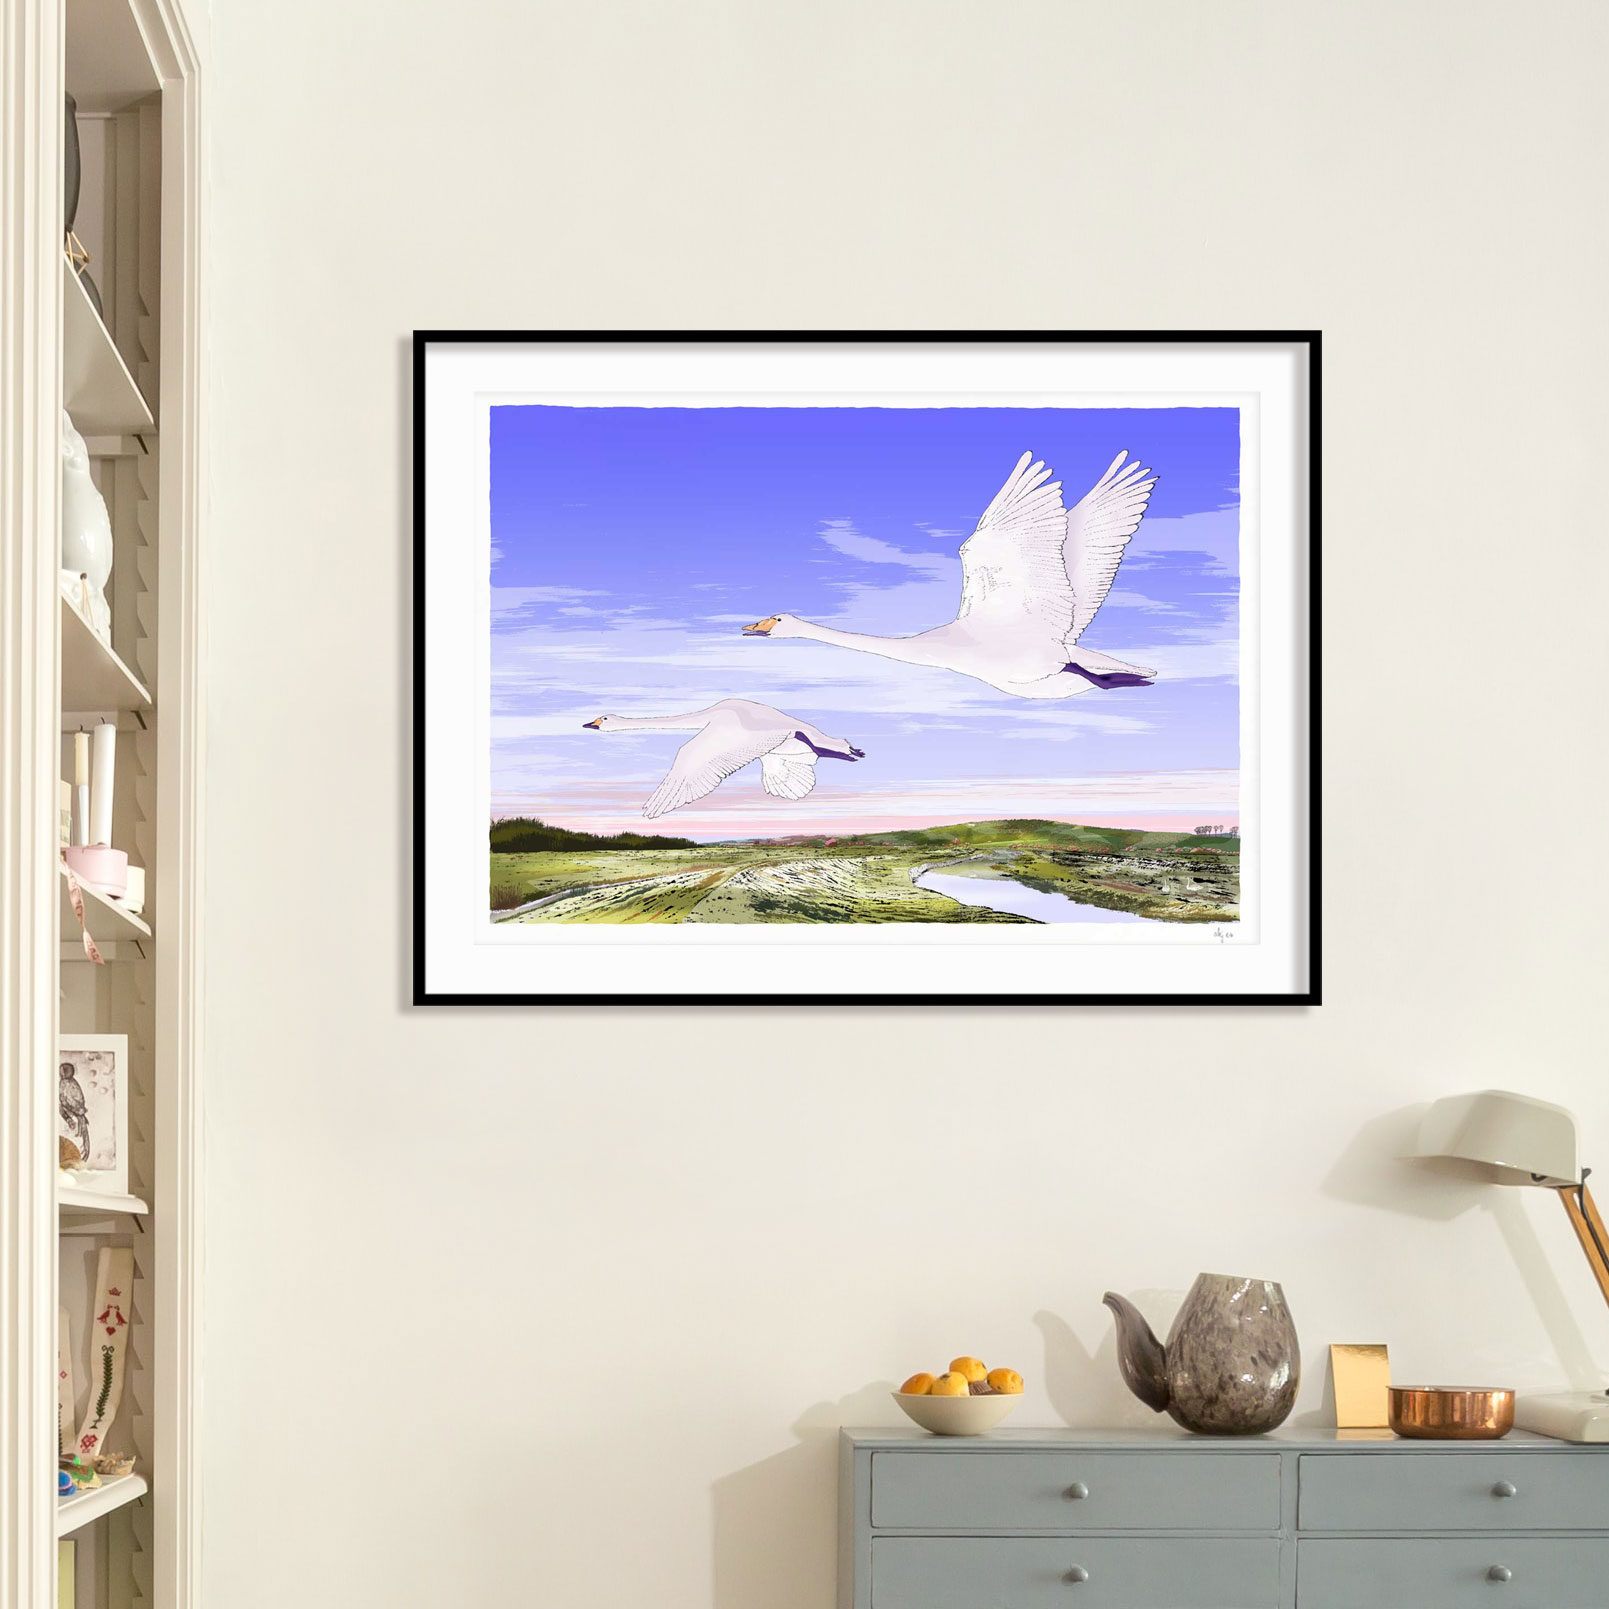 Swan Art Eventide. The flight over Litlington White Horse in the South Downs framed